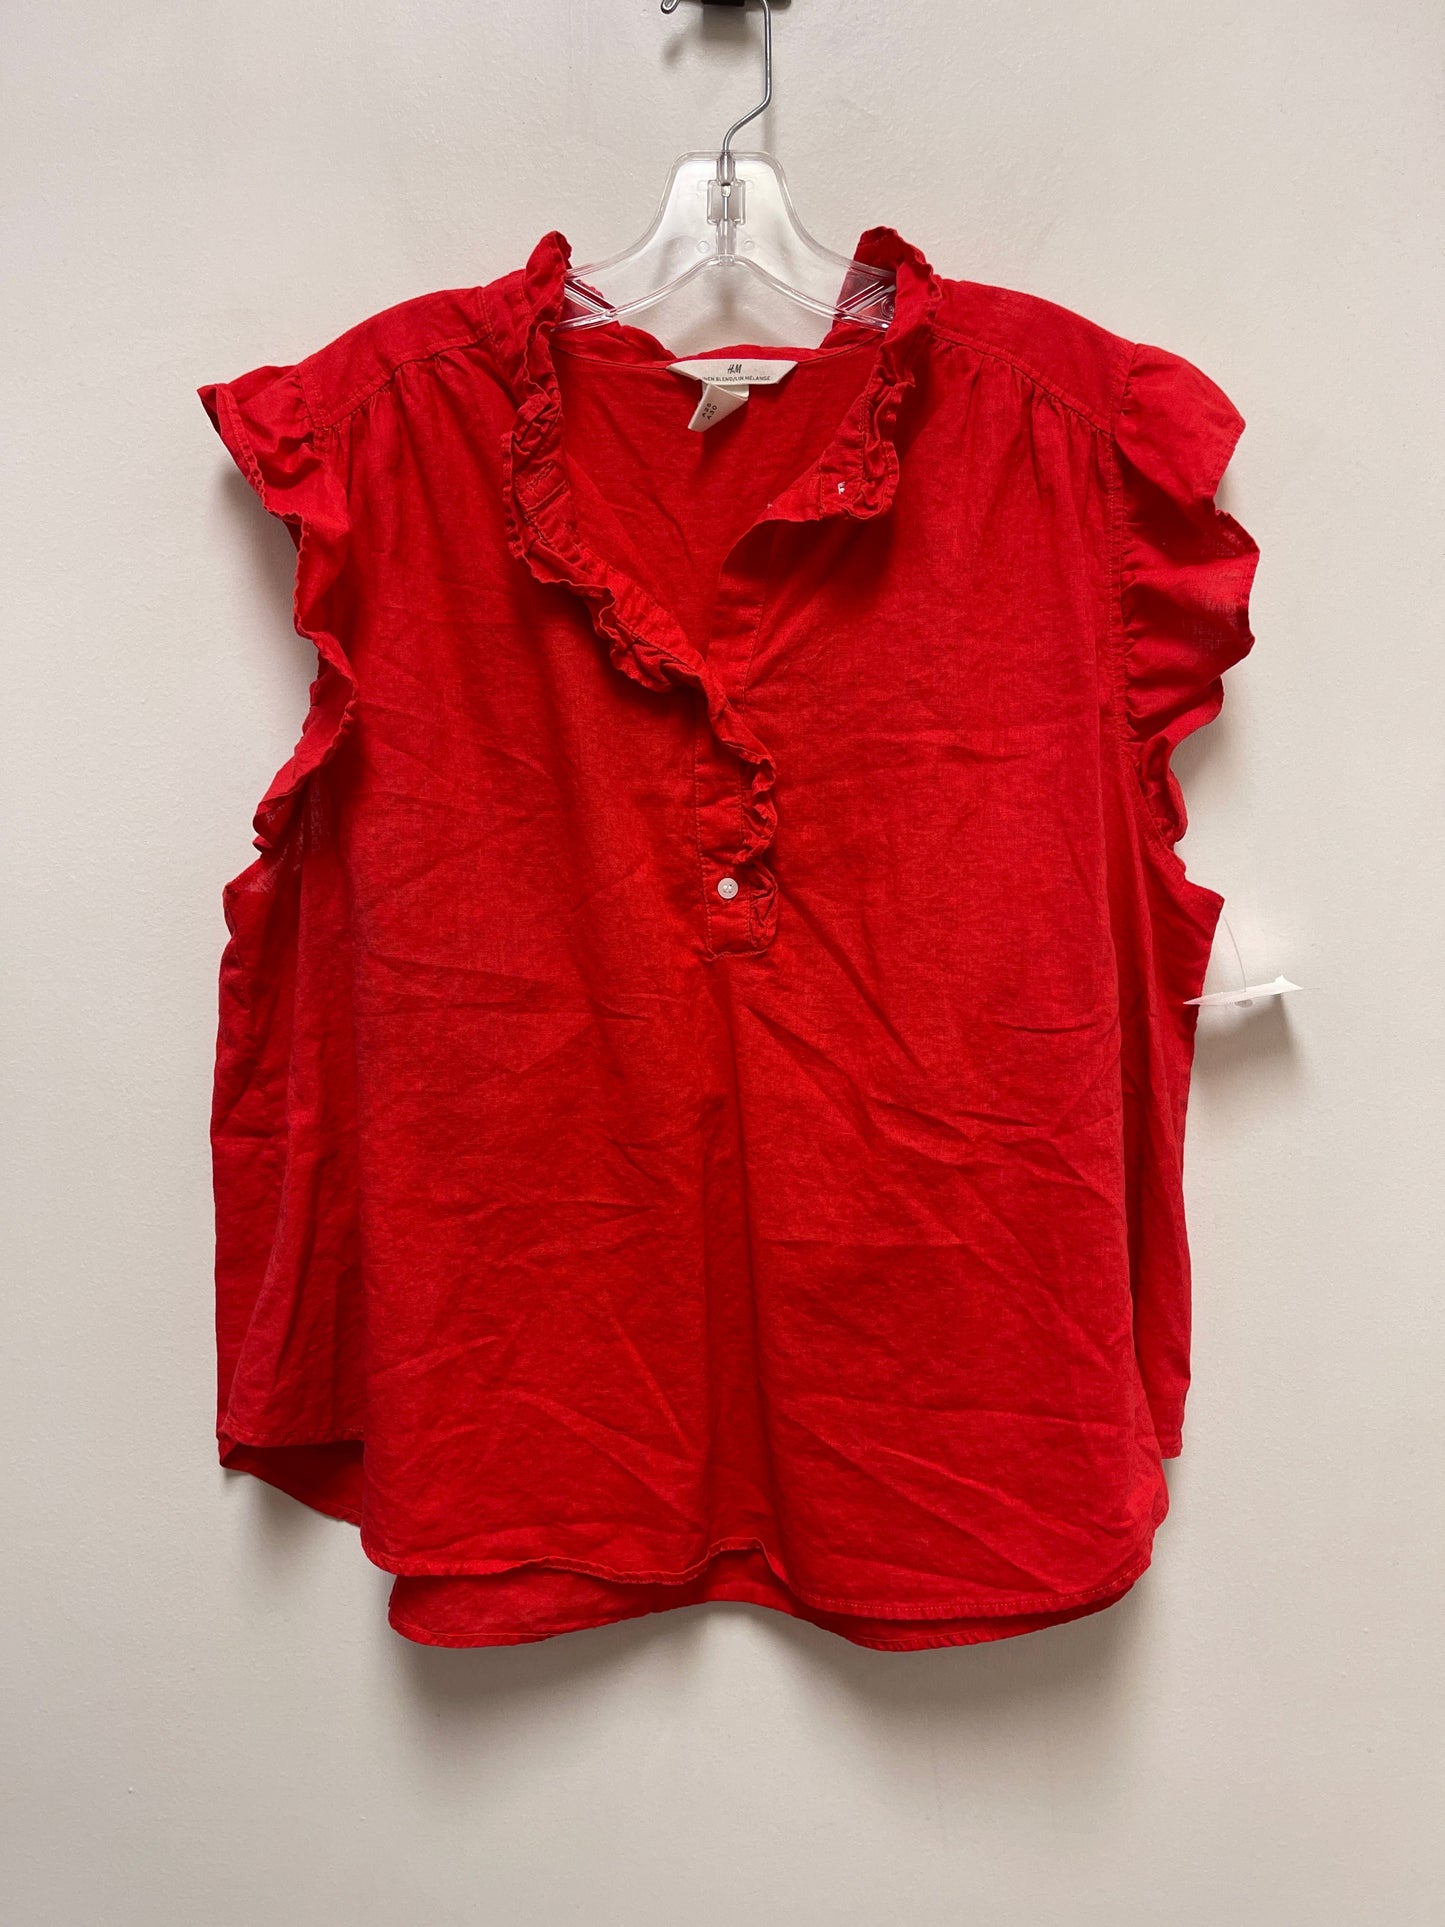 Red Top Short Sleeve H&m, Size Xl